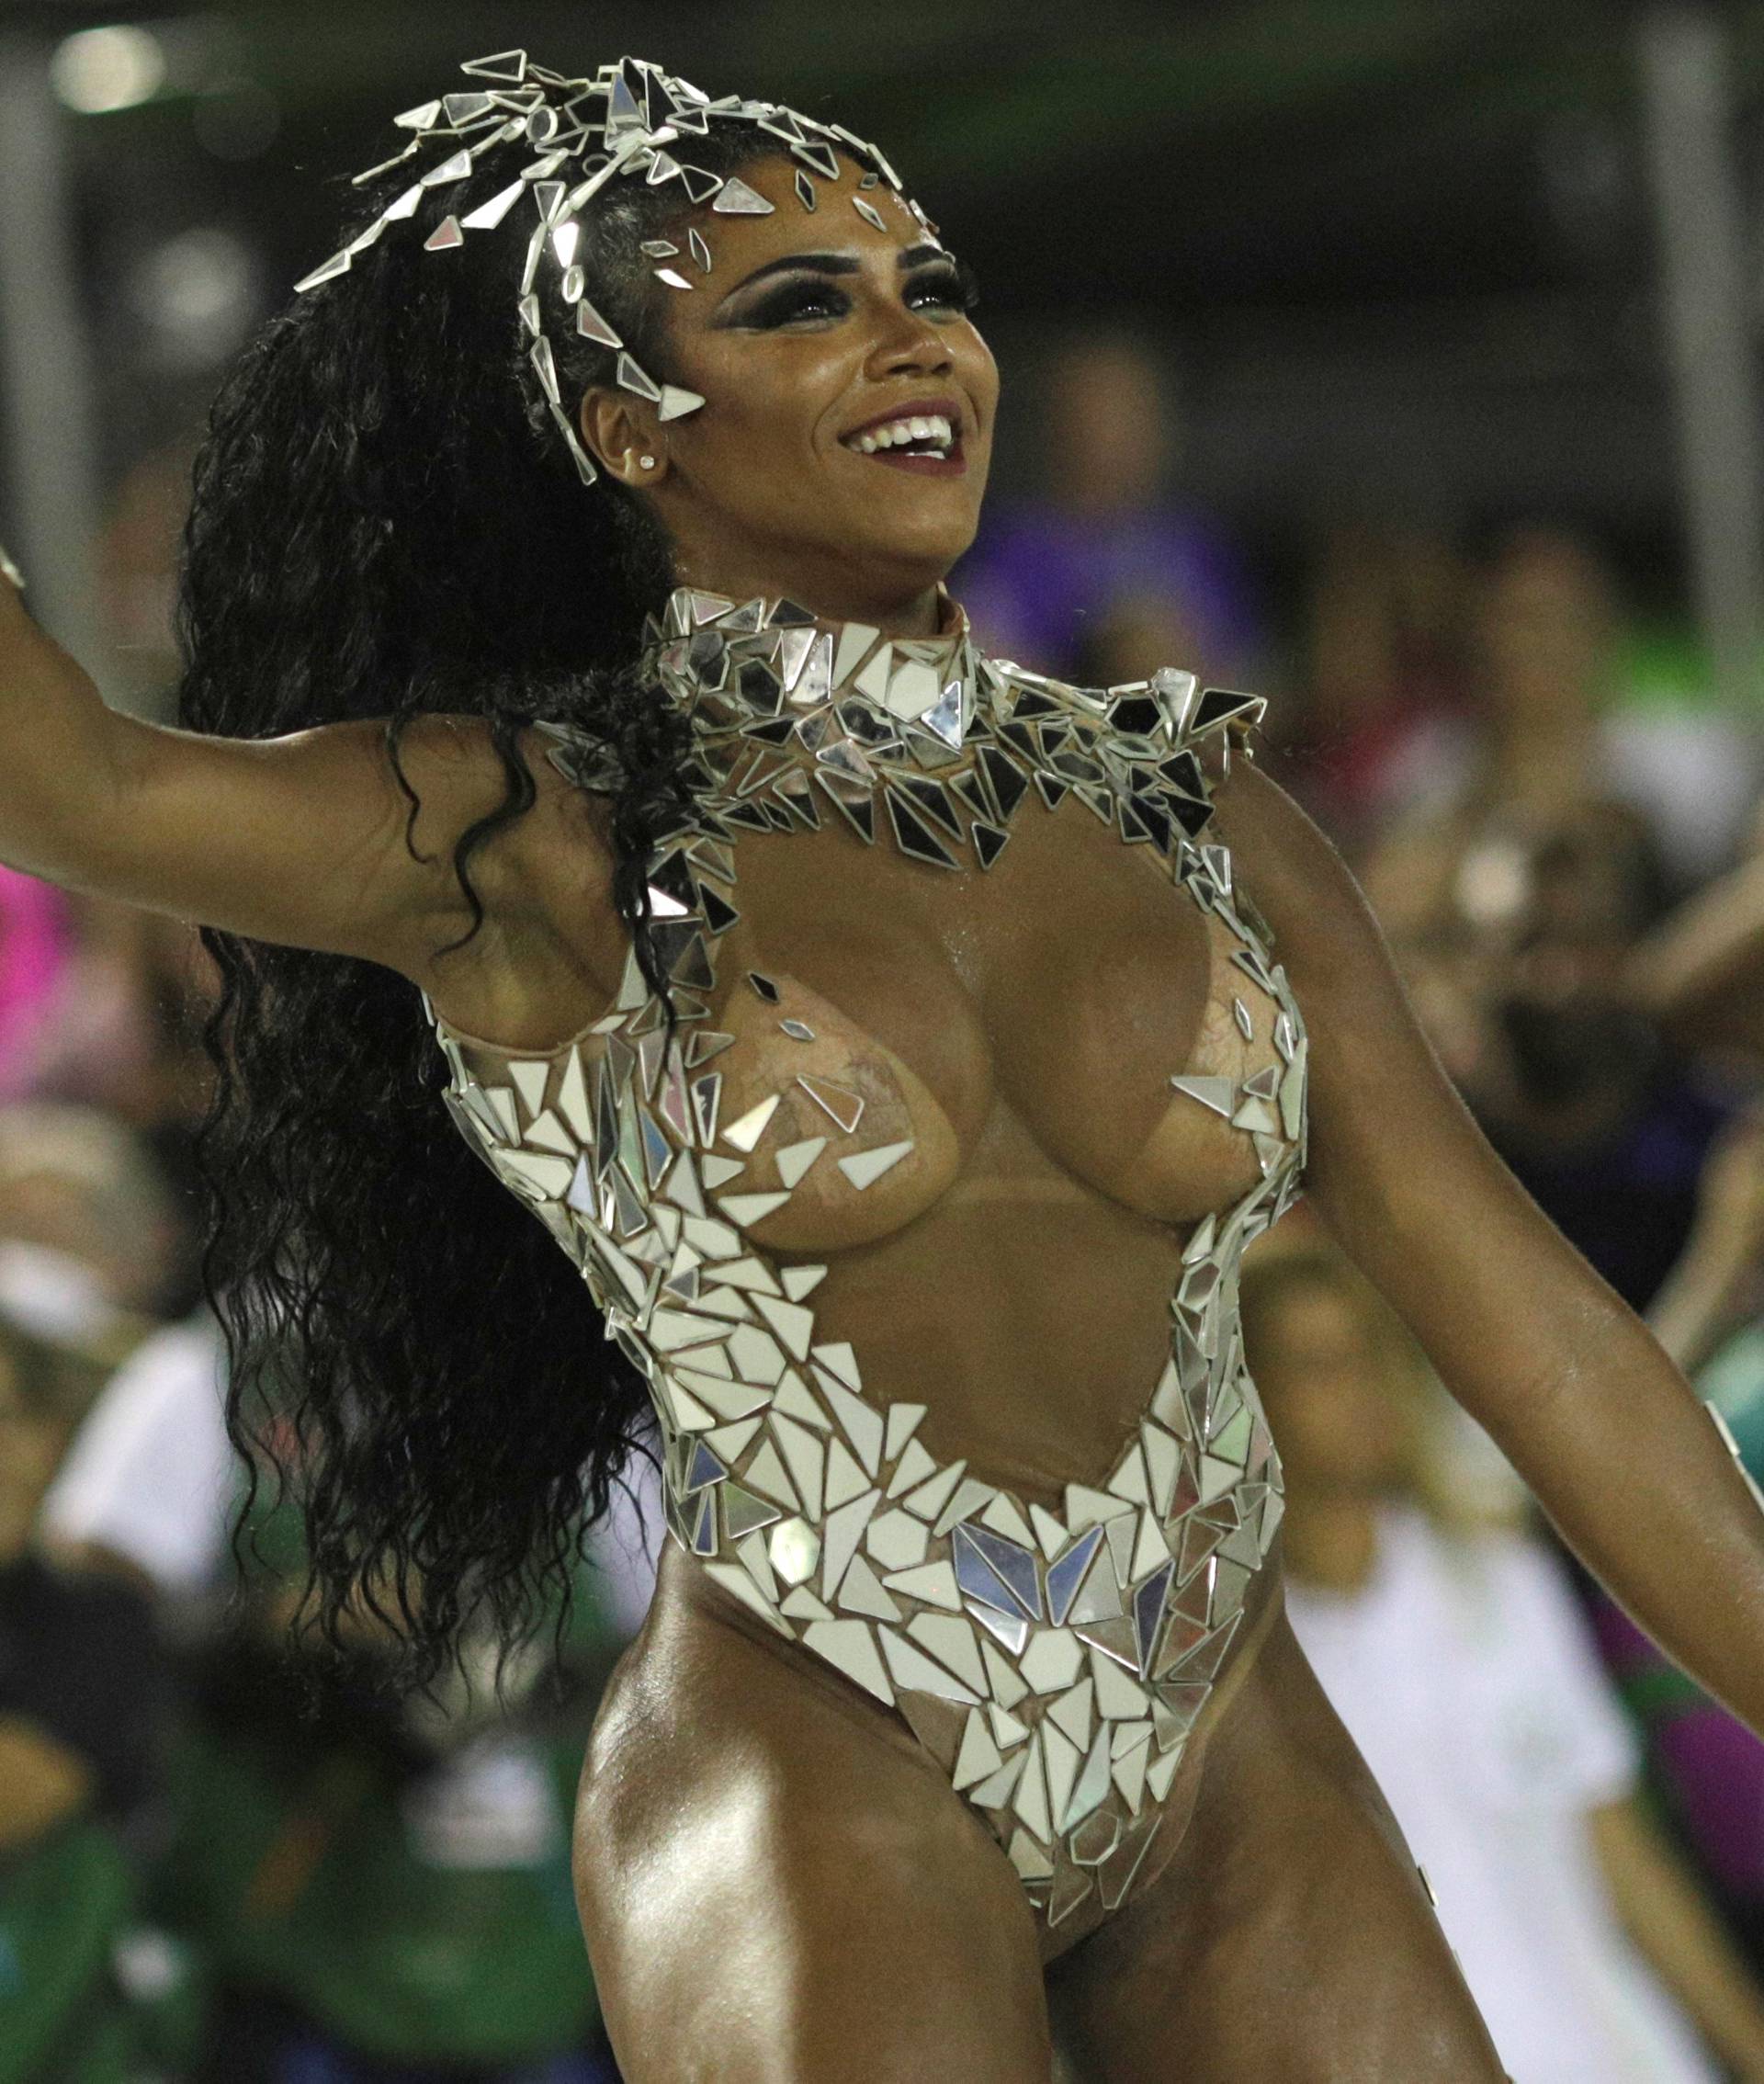 Drum queen Evelyn Bastos from Mangueira samba school perform during the first night of the Carnival parade at the Sambadrome in Rio de Janeiro